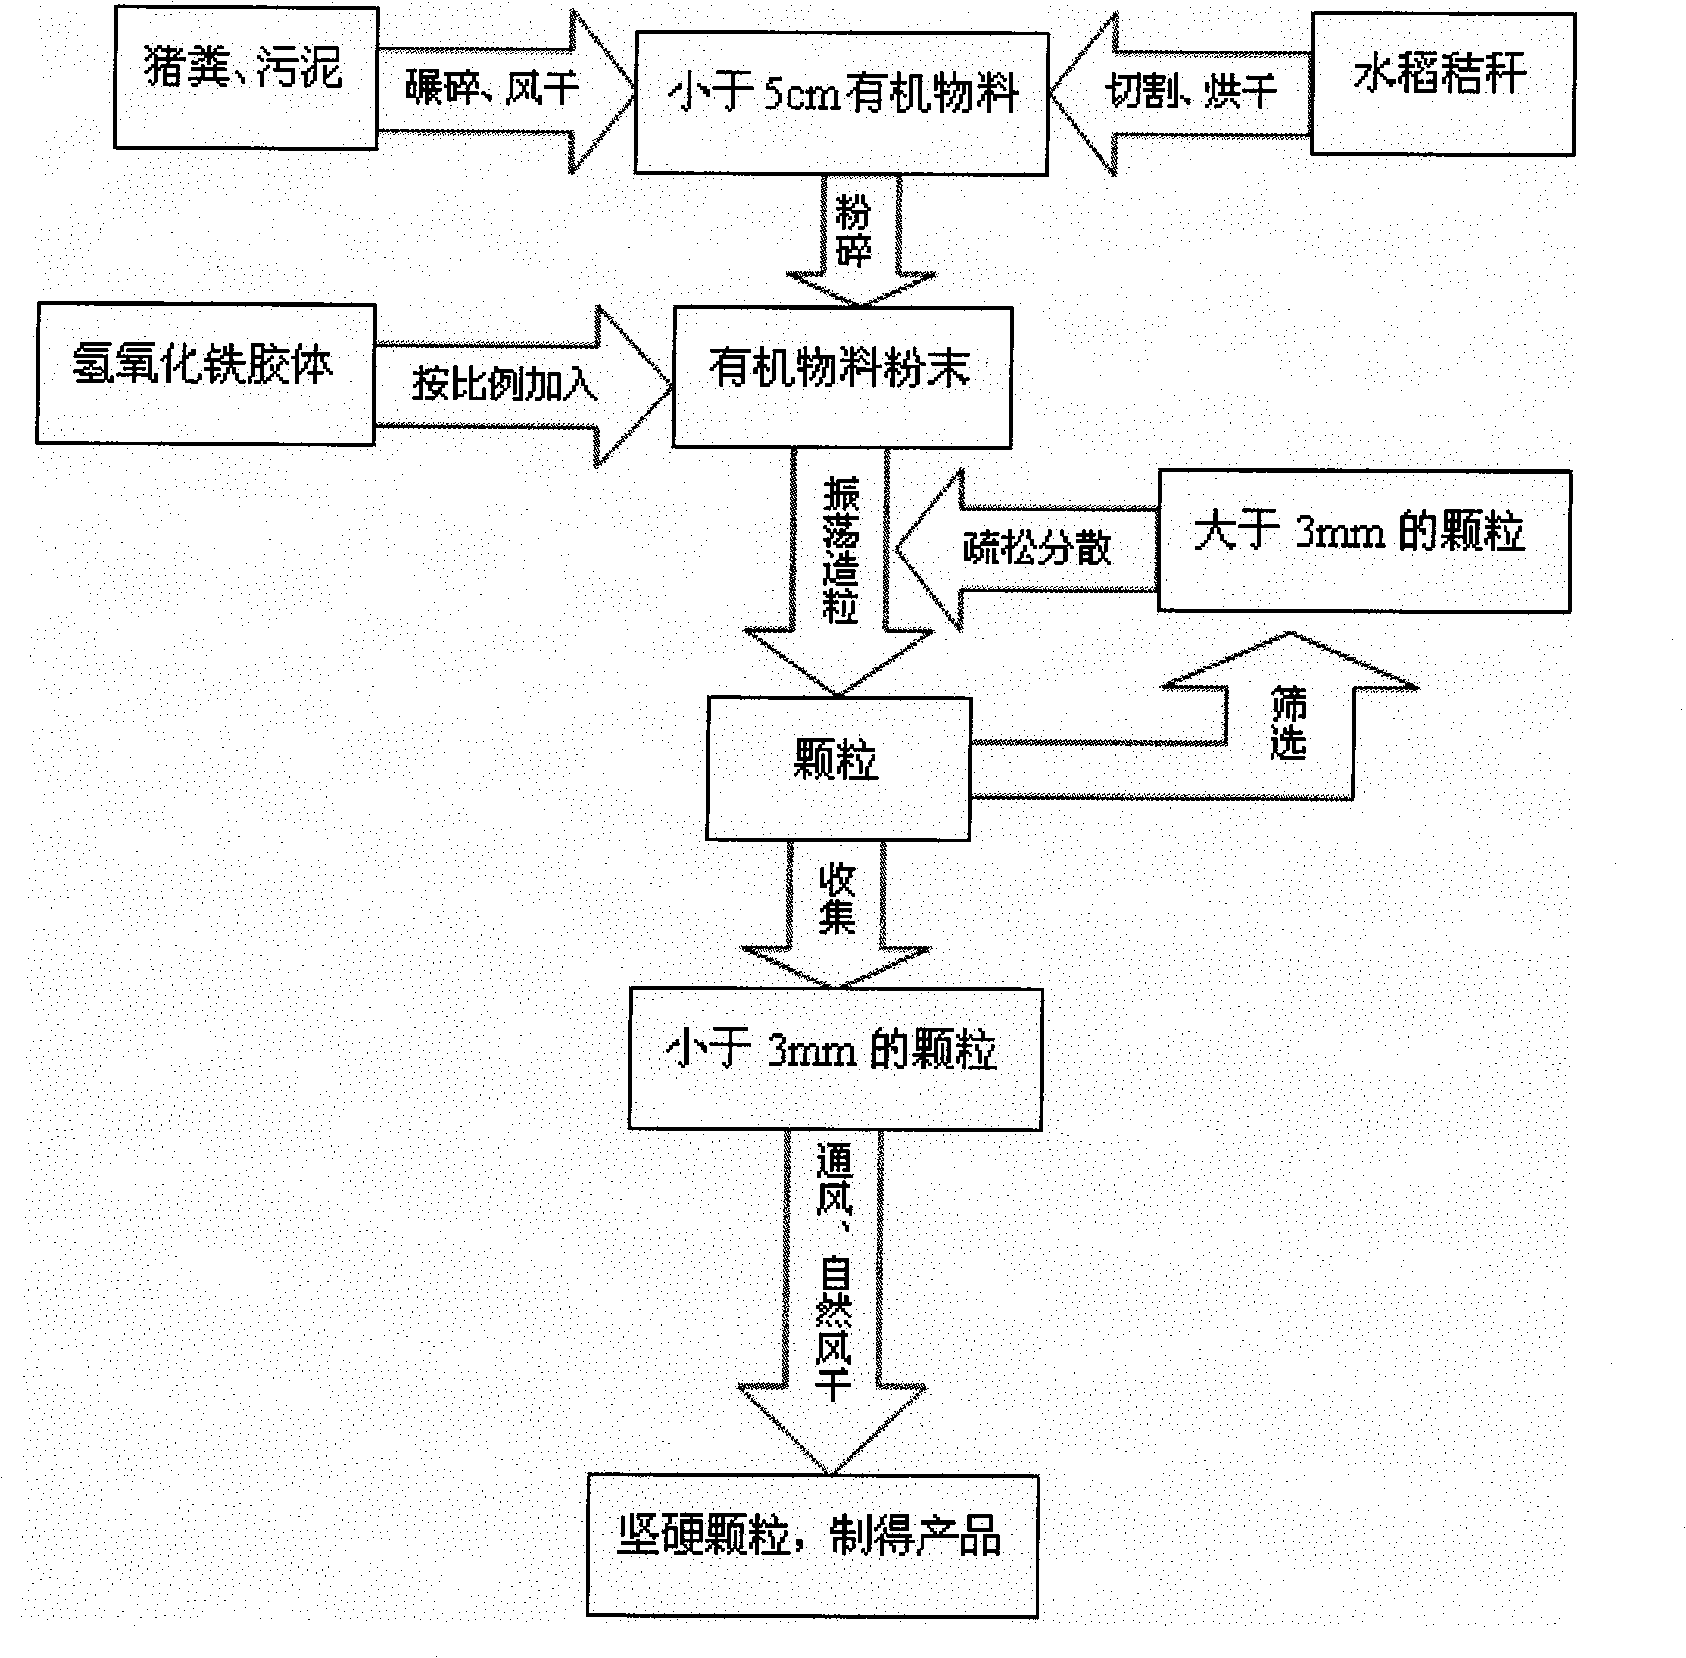 Method for inhibiting carbon dioxide released by mineralizing organic material